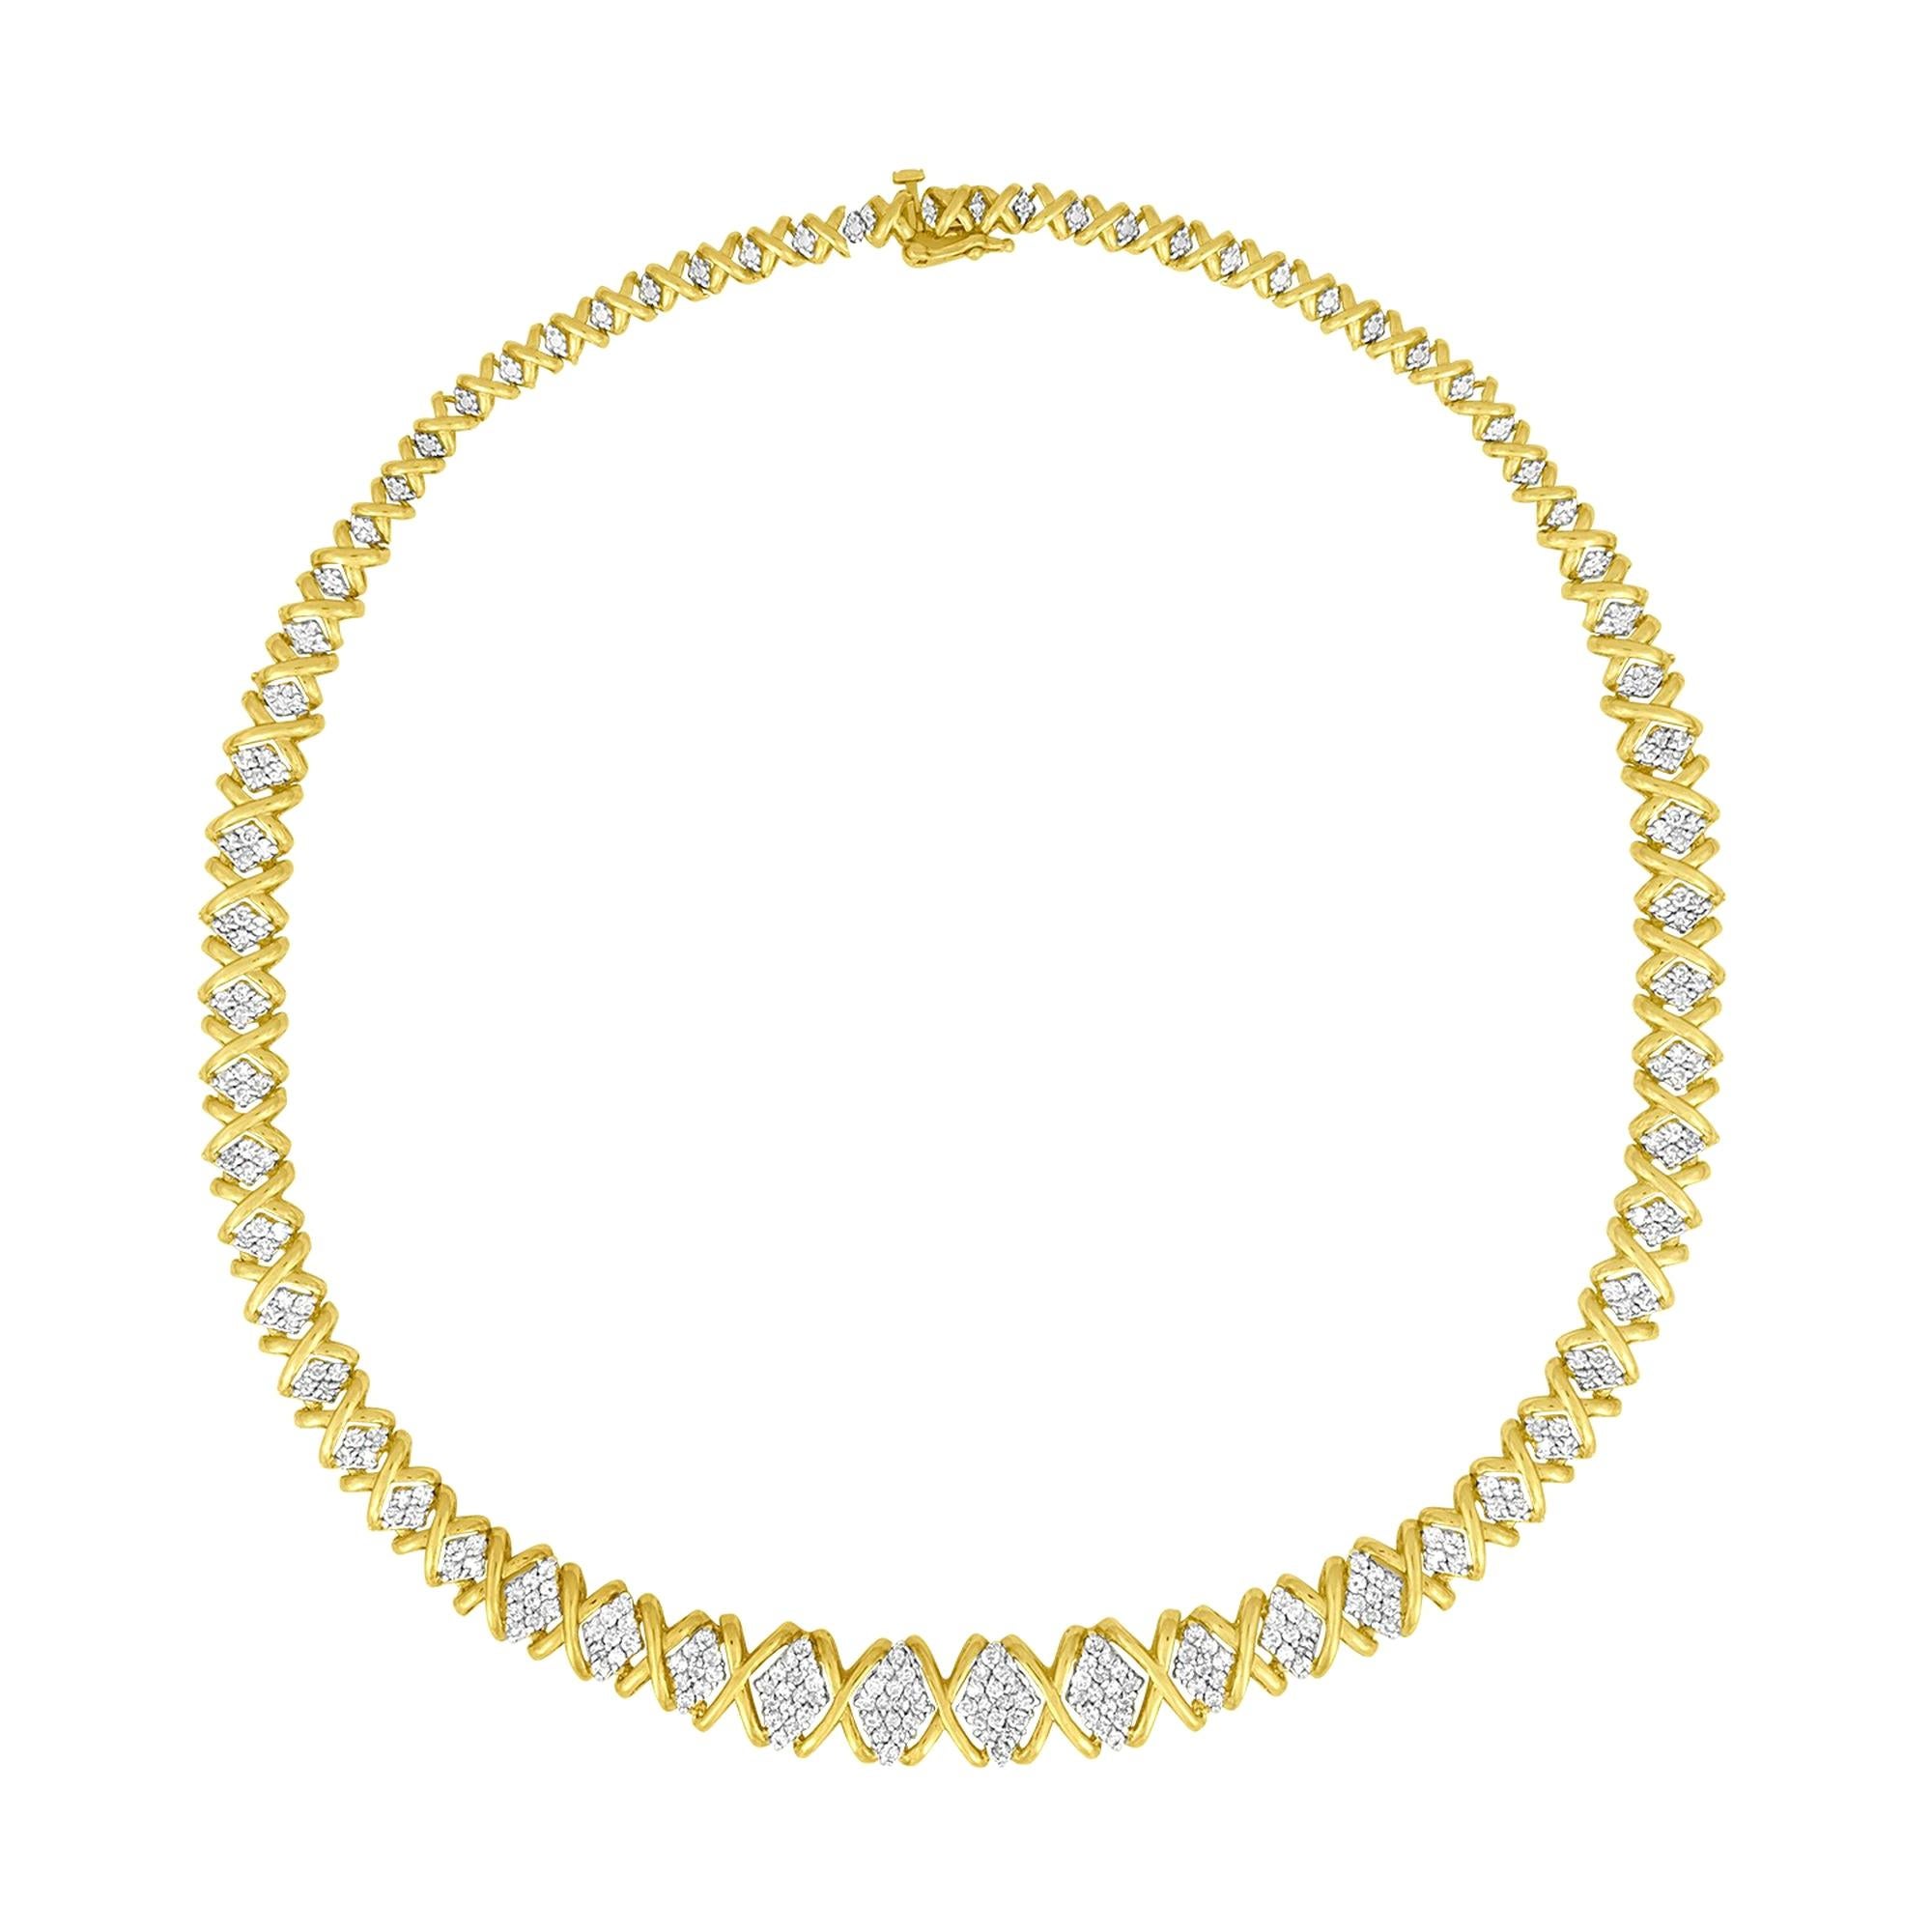 10K Yellow Gold 4.0 Cttw Diamond Graduating Riviera Statement Necklace For Sale